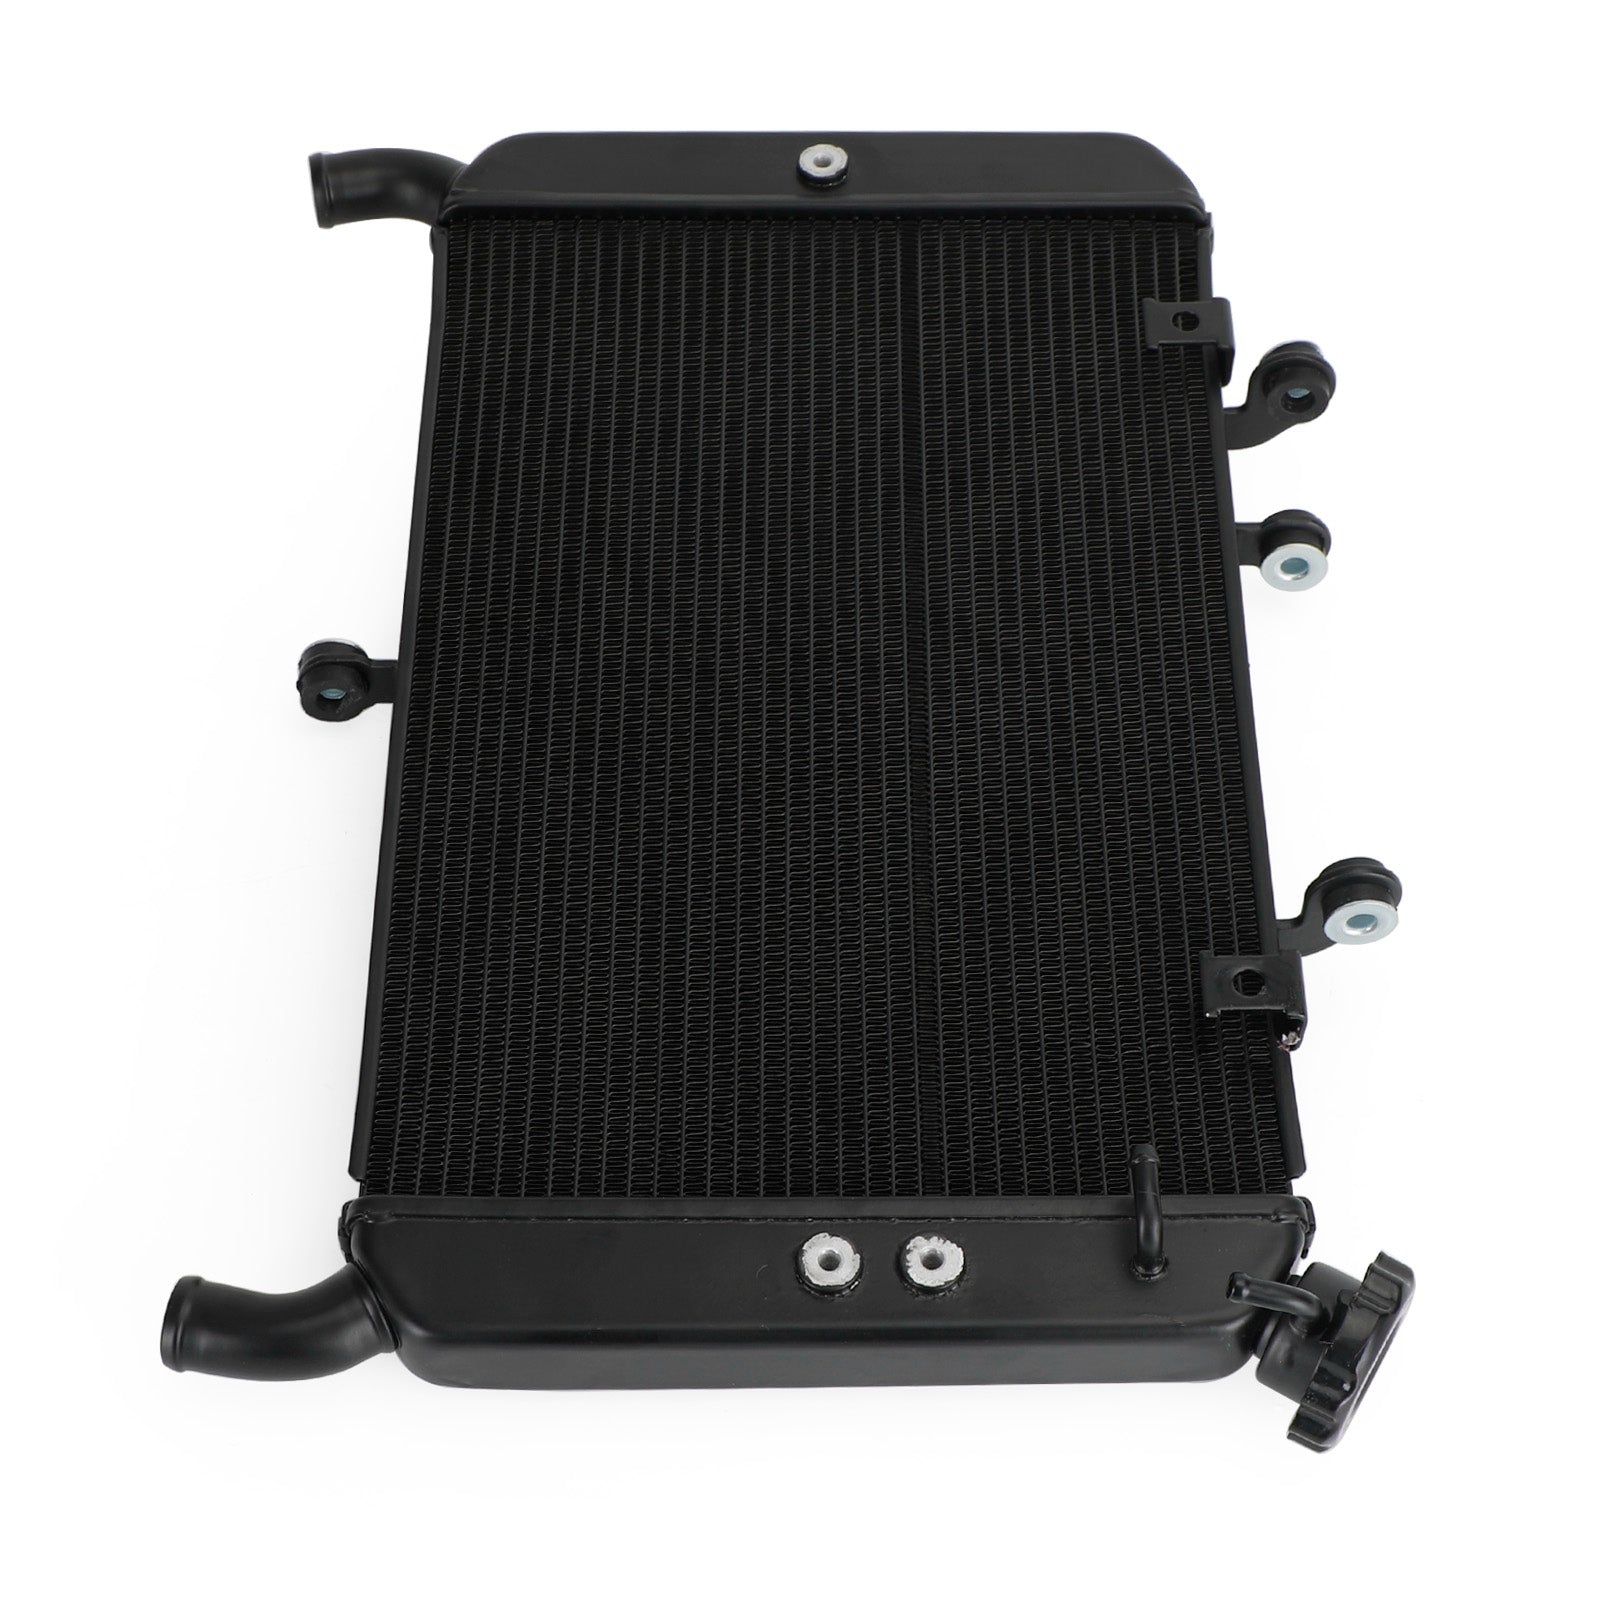 Core Engine Water Cooling Cooler Radiator For Yamaha MT-09 FZ09 2013-2016 Generic